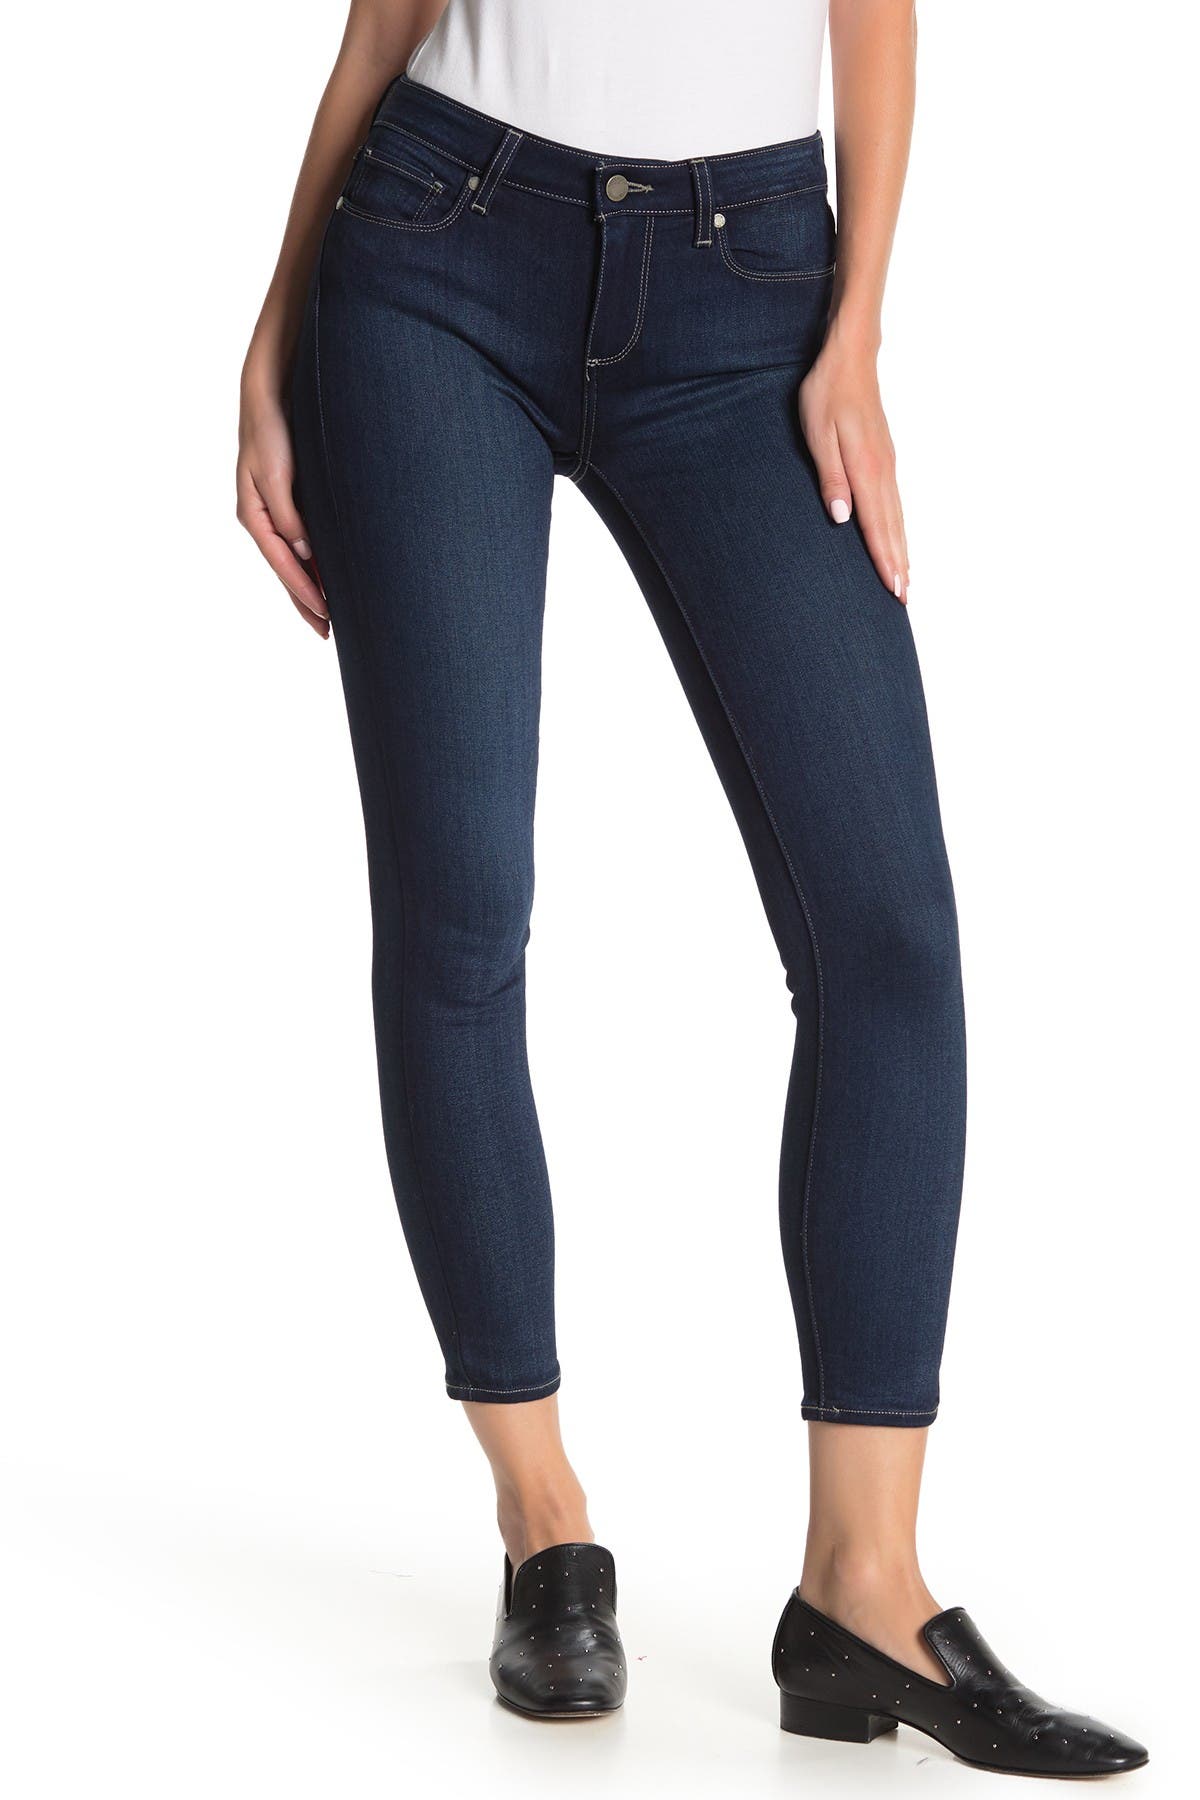 paige cropped jeans